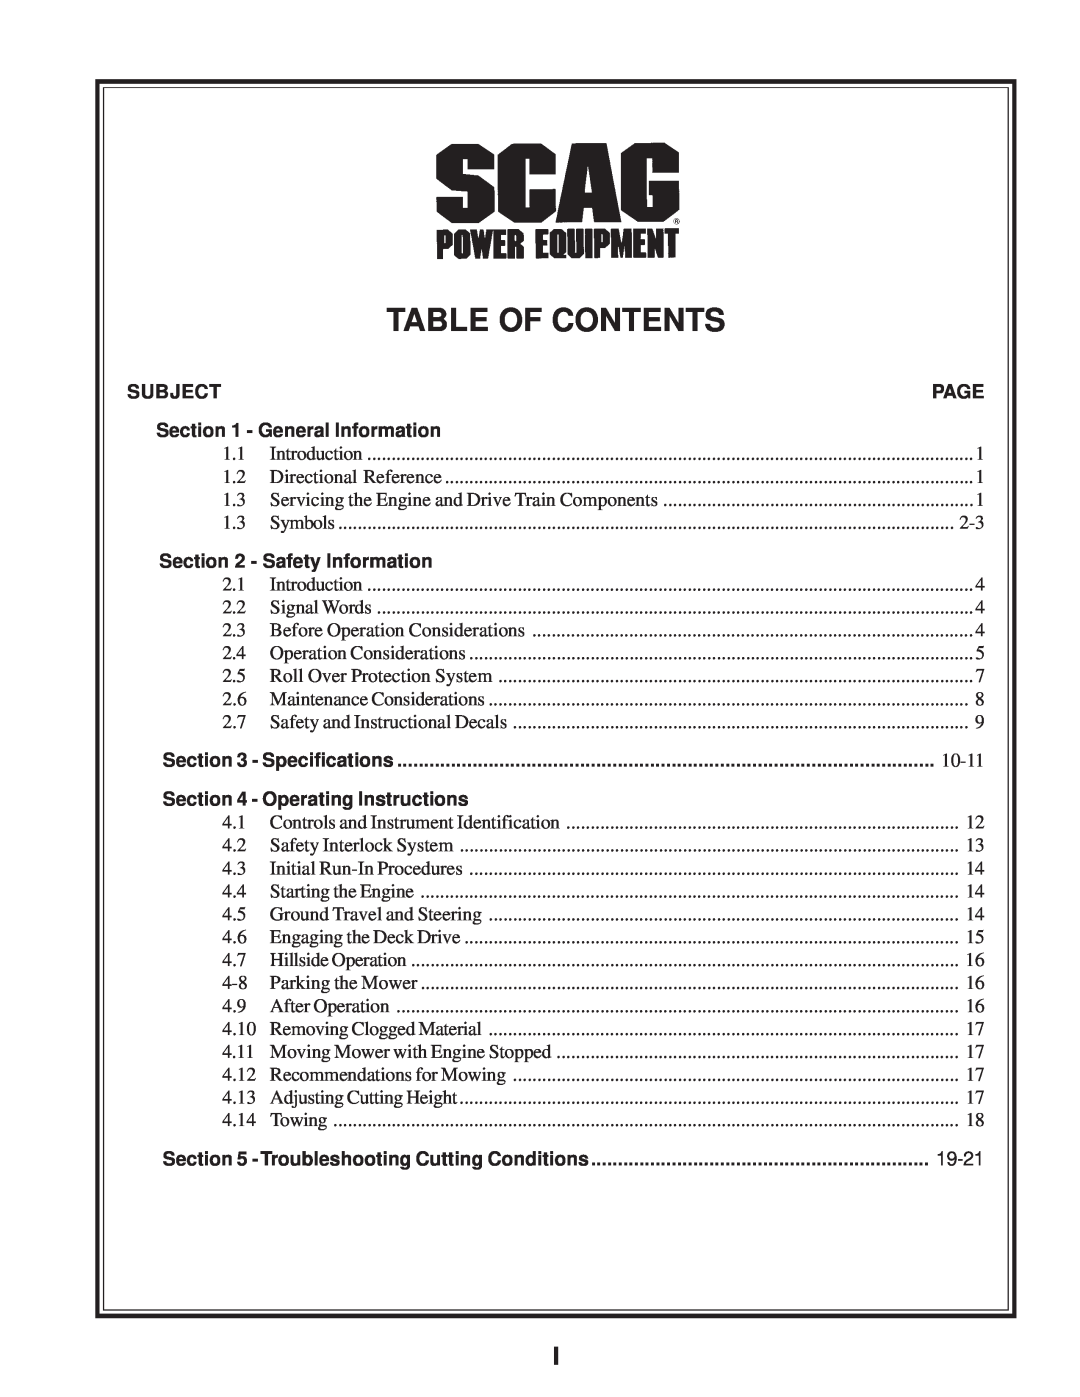 Scag Power Equipment SFZ manual Table Of Contents, Subject, General Information, Safety Information, Operating Instructions 